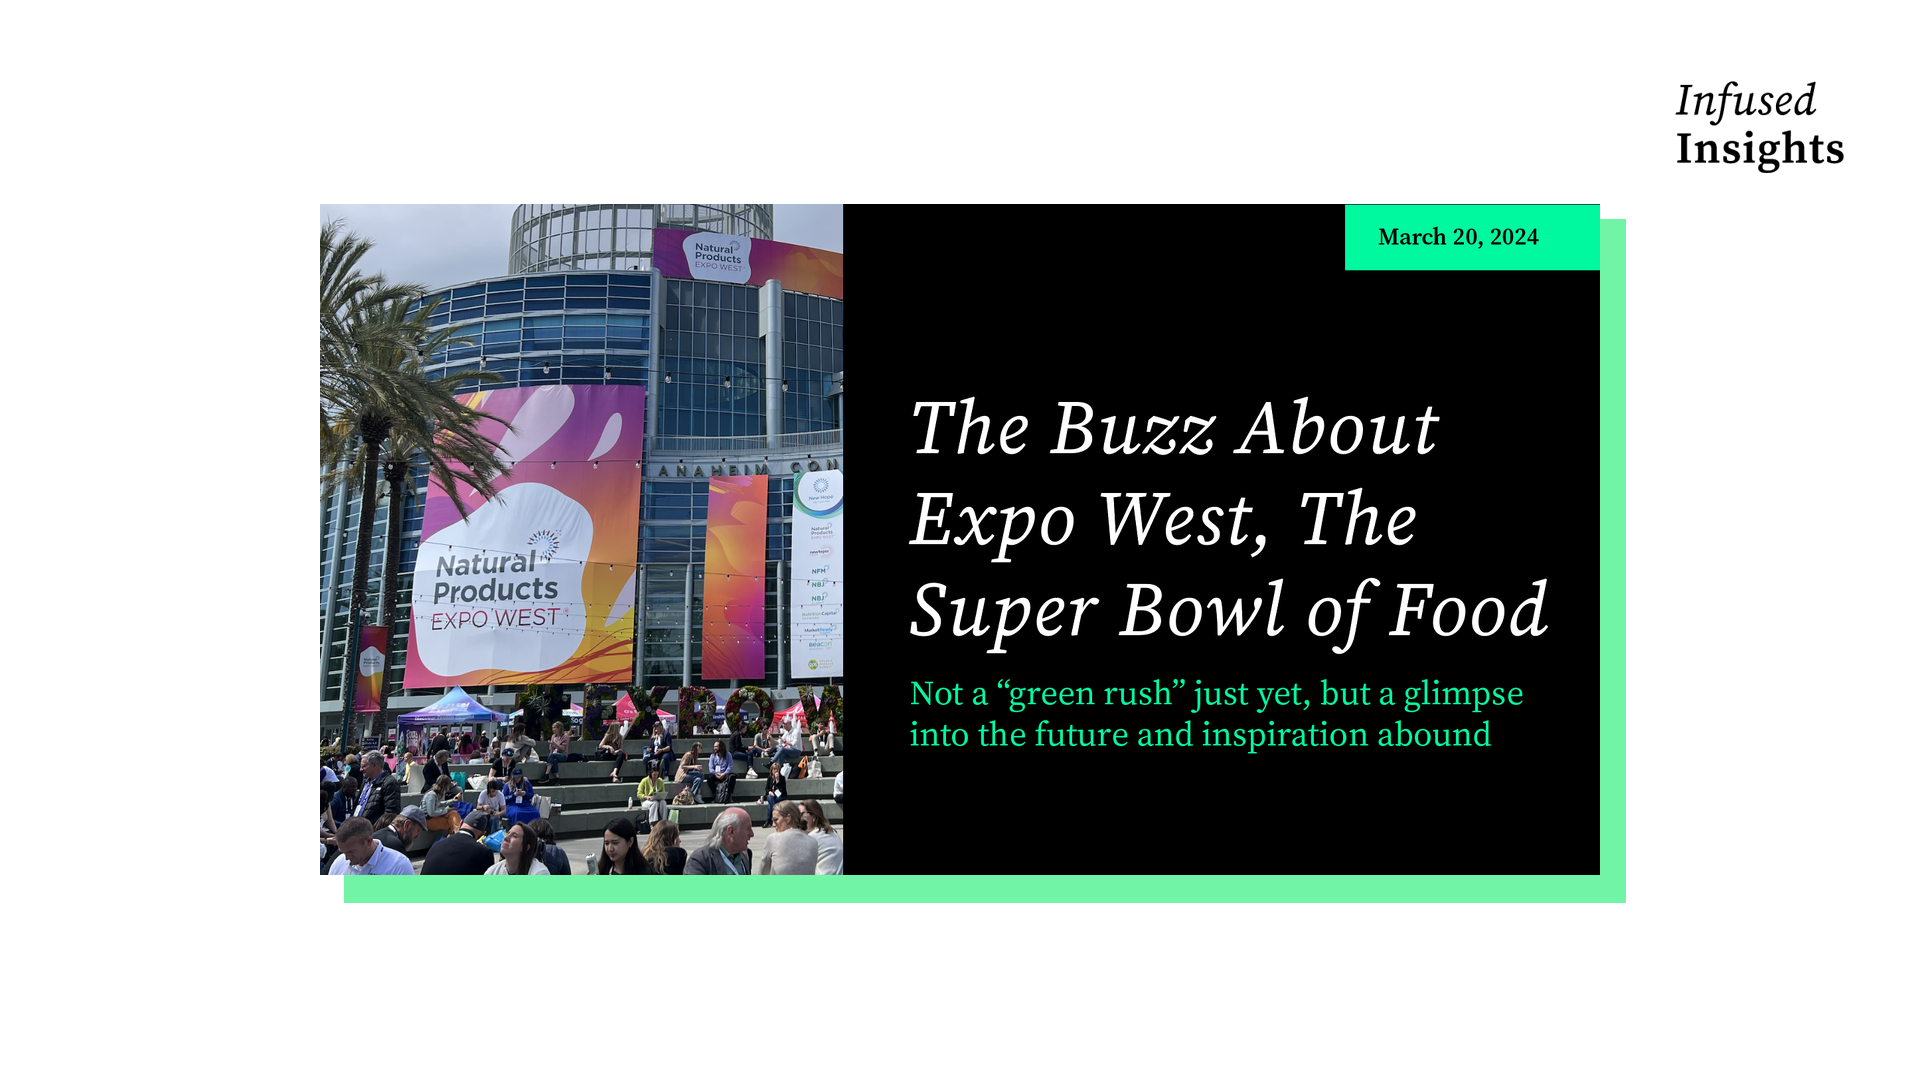 The Buzz About Expo West, the Super Bowl of Food